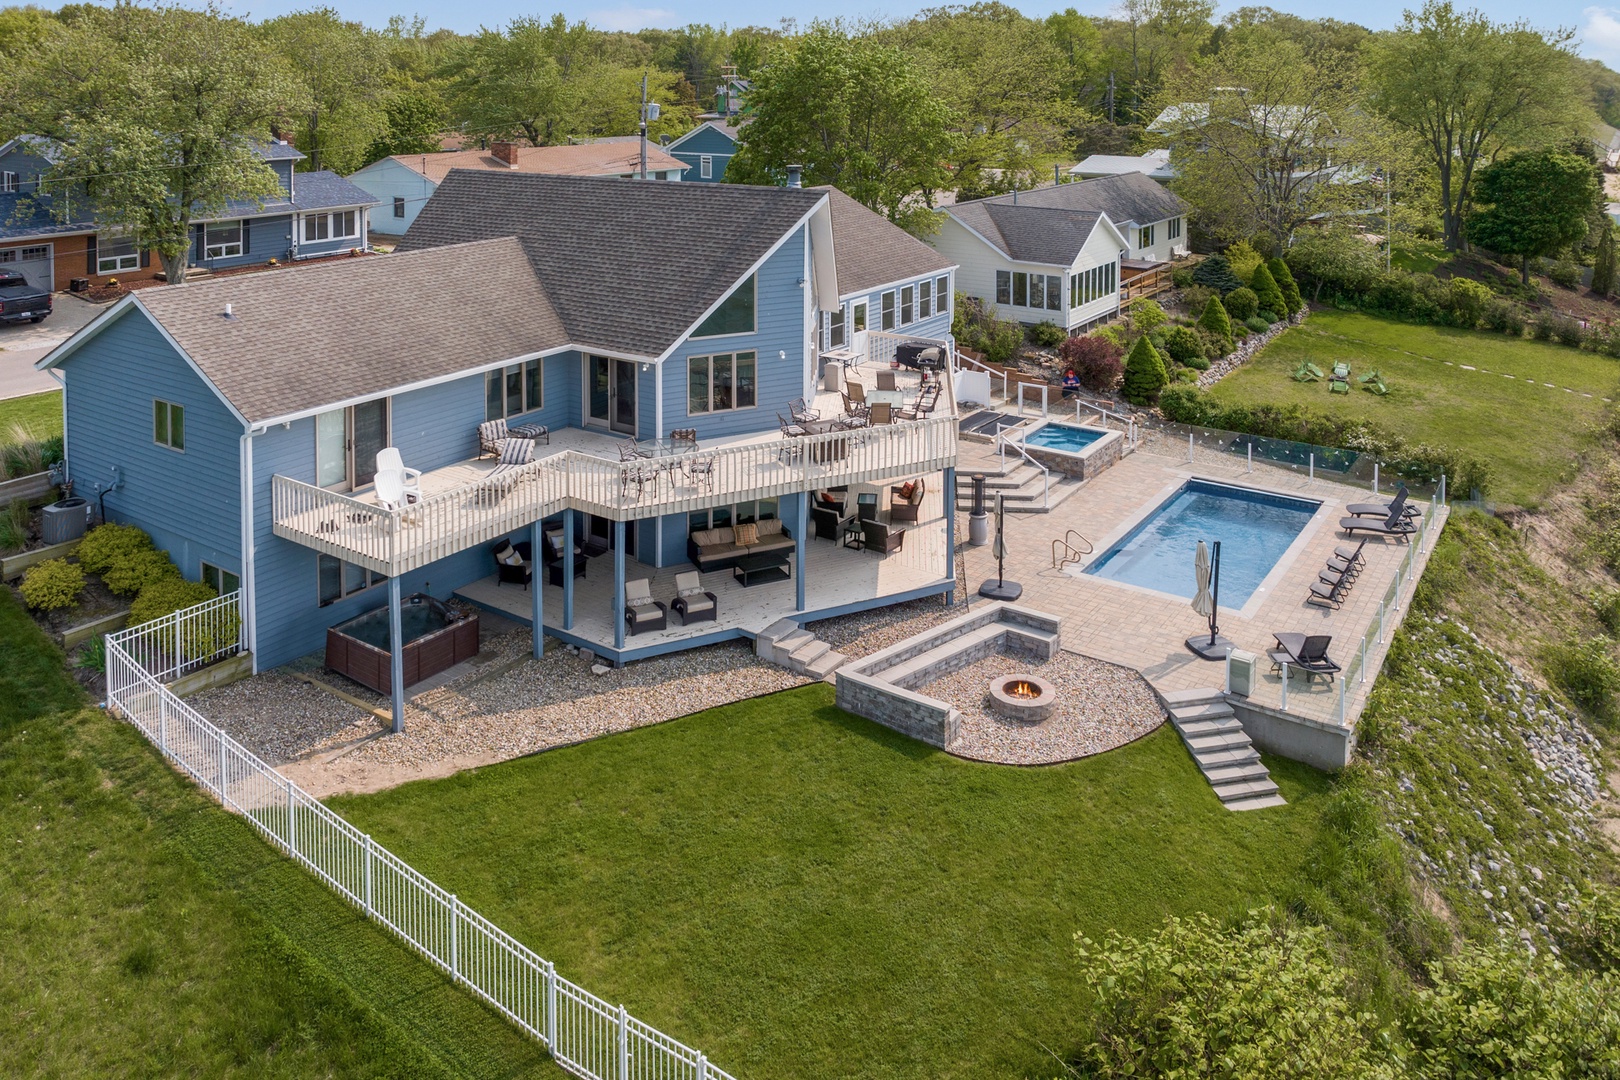 With its prime location, this lakefront home is the ultimate getaway destination.